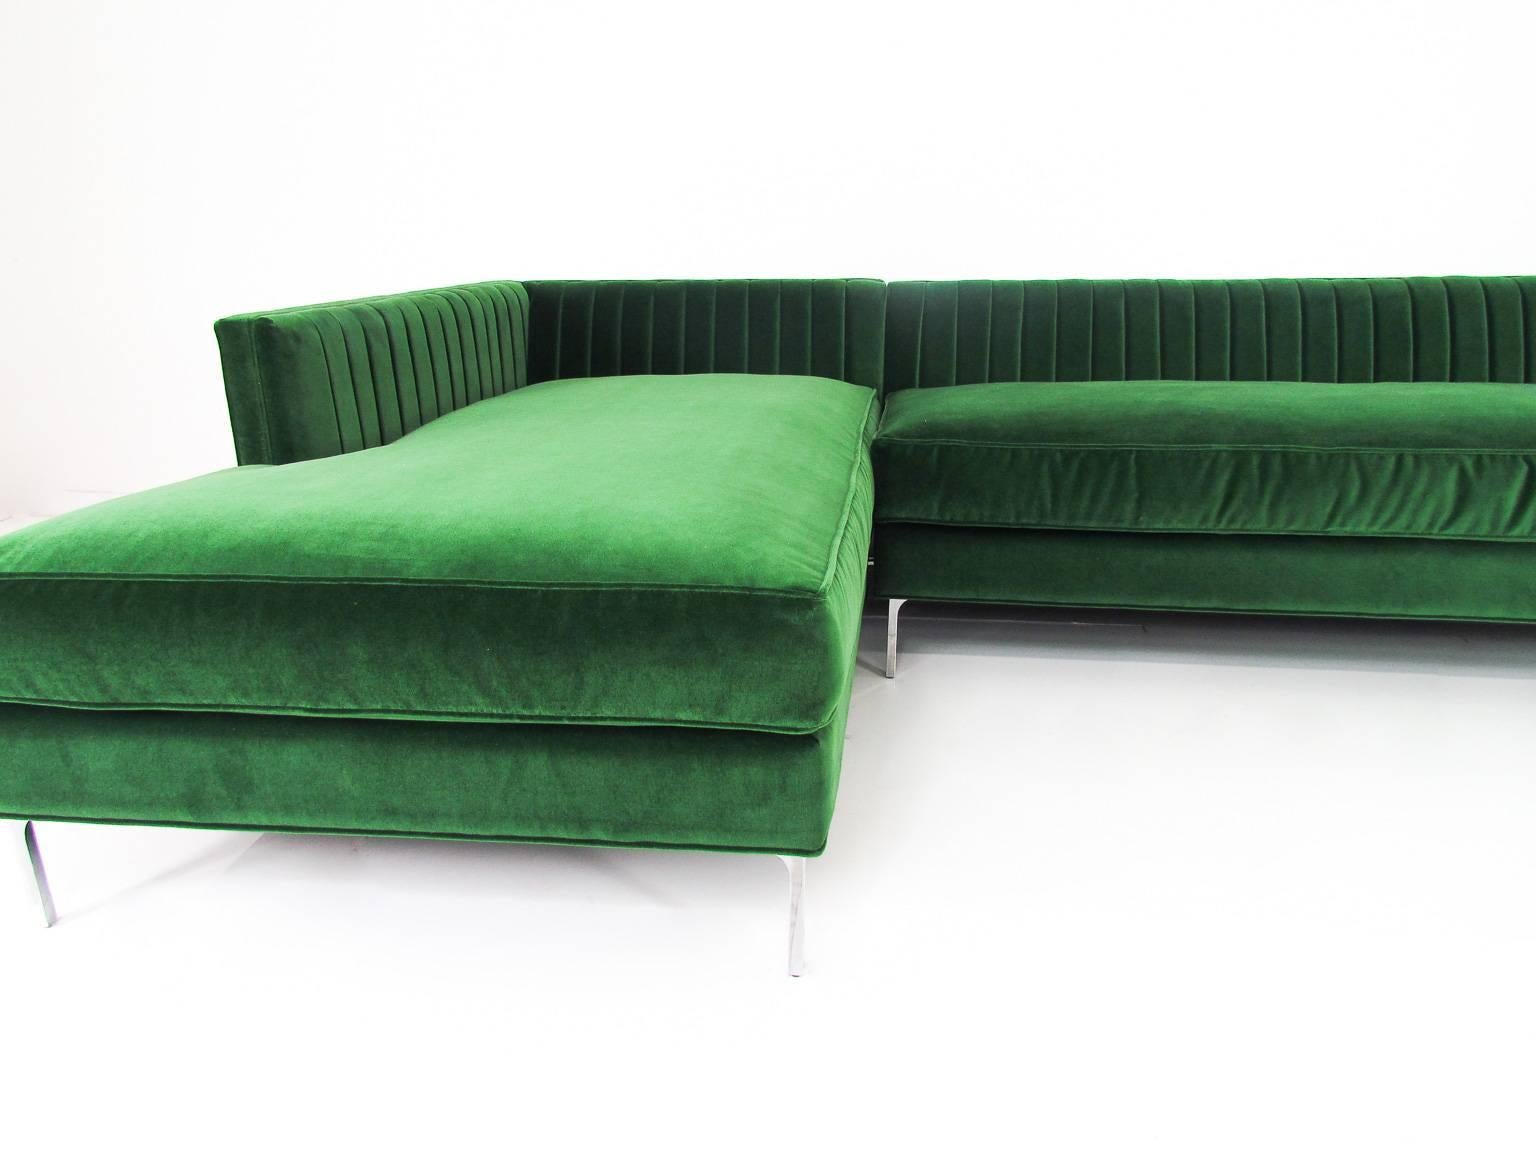 This Mid-Century inspired sectional pays tribute to that. With long arm tufting, chrome legs, and stunning emerald velvet.
This is a made to order piece.